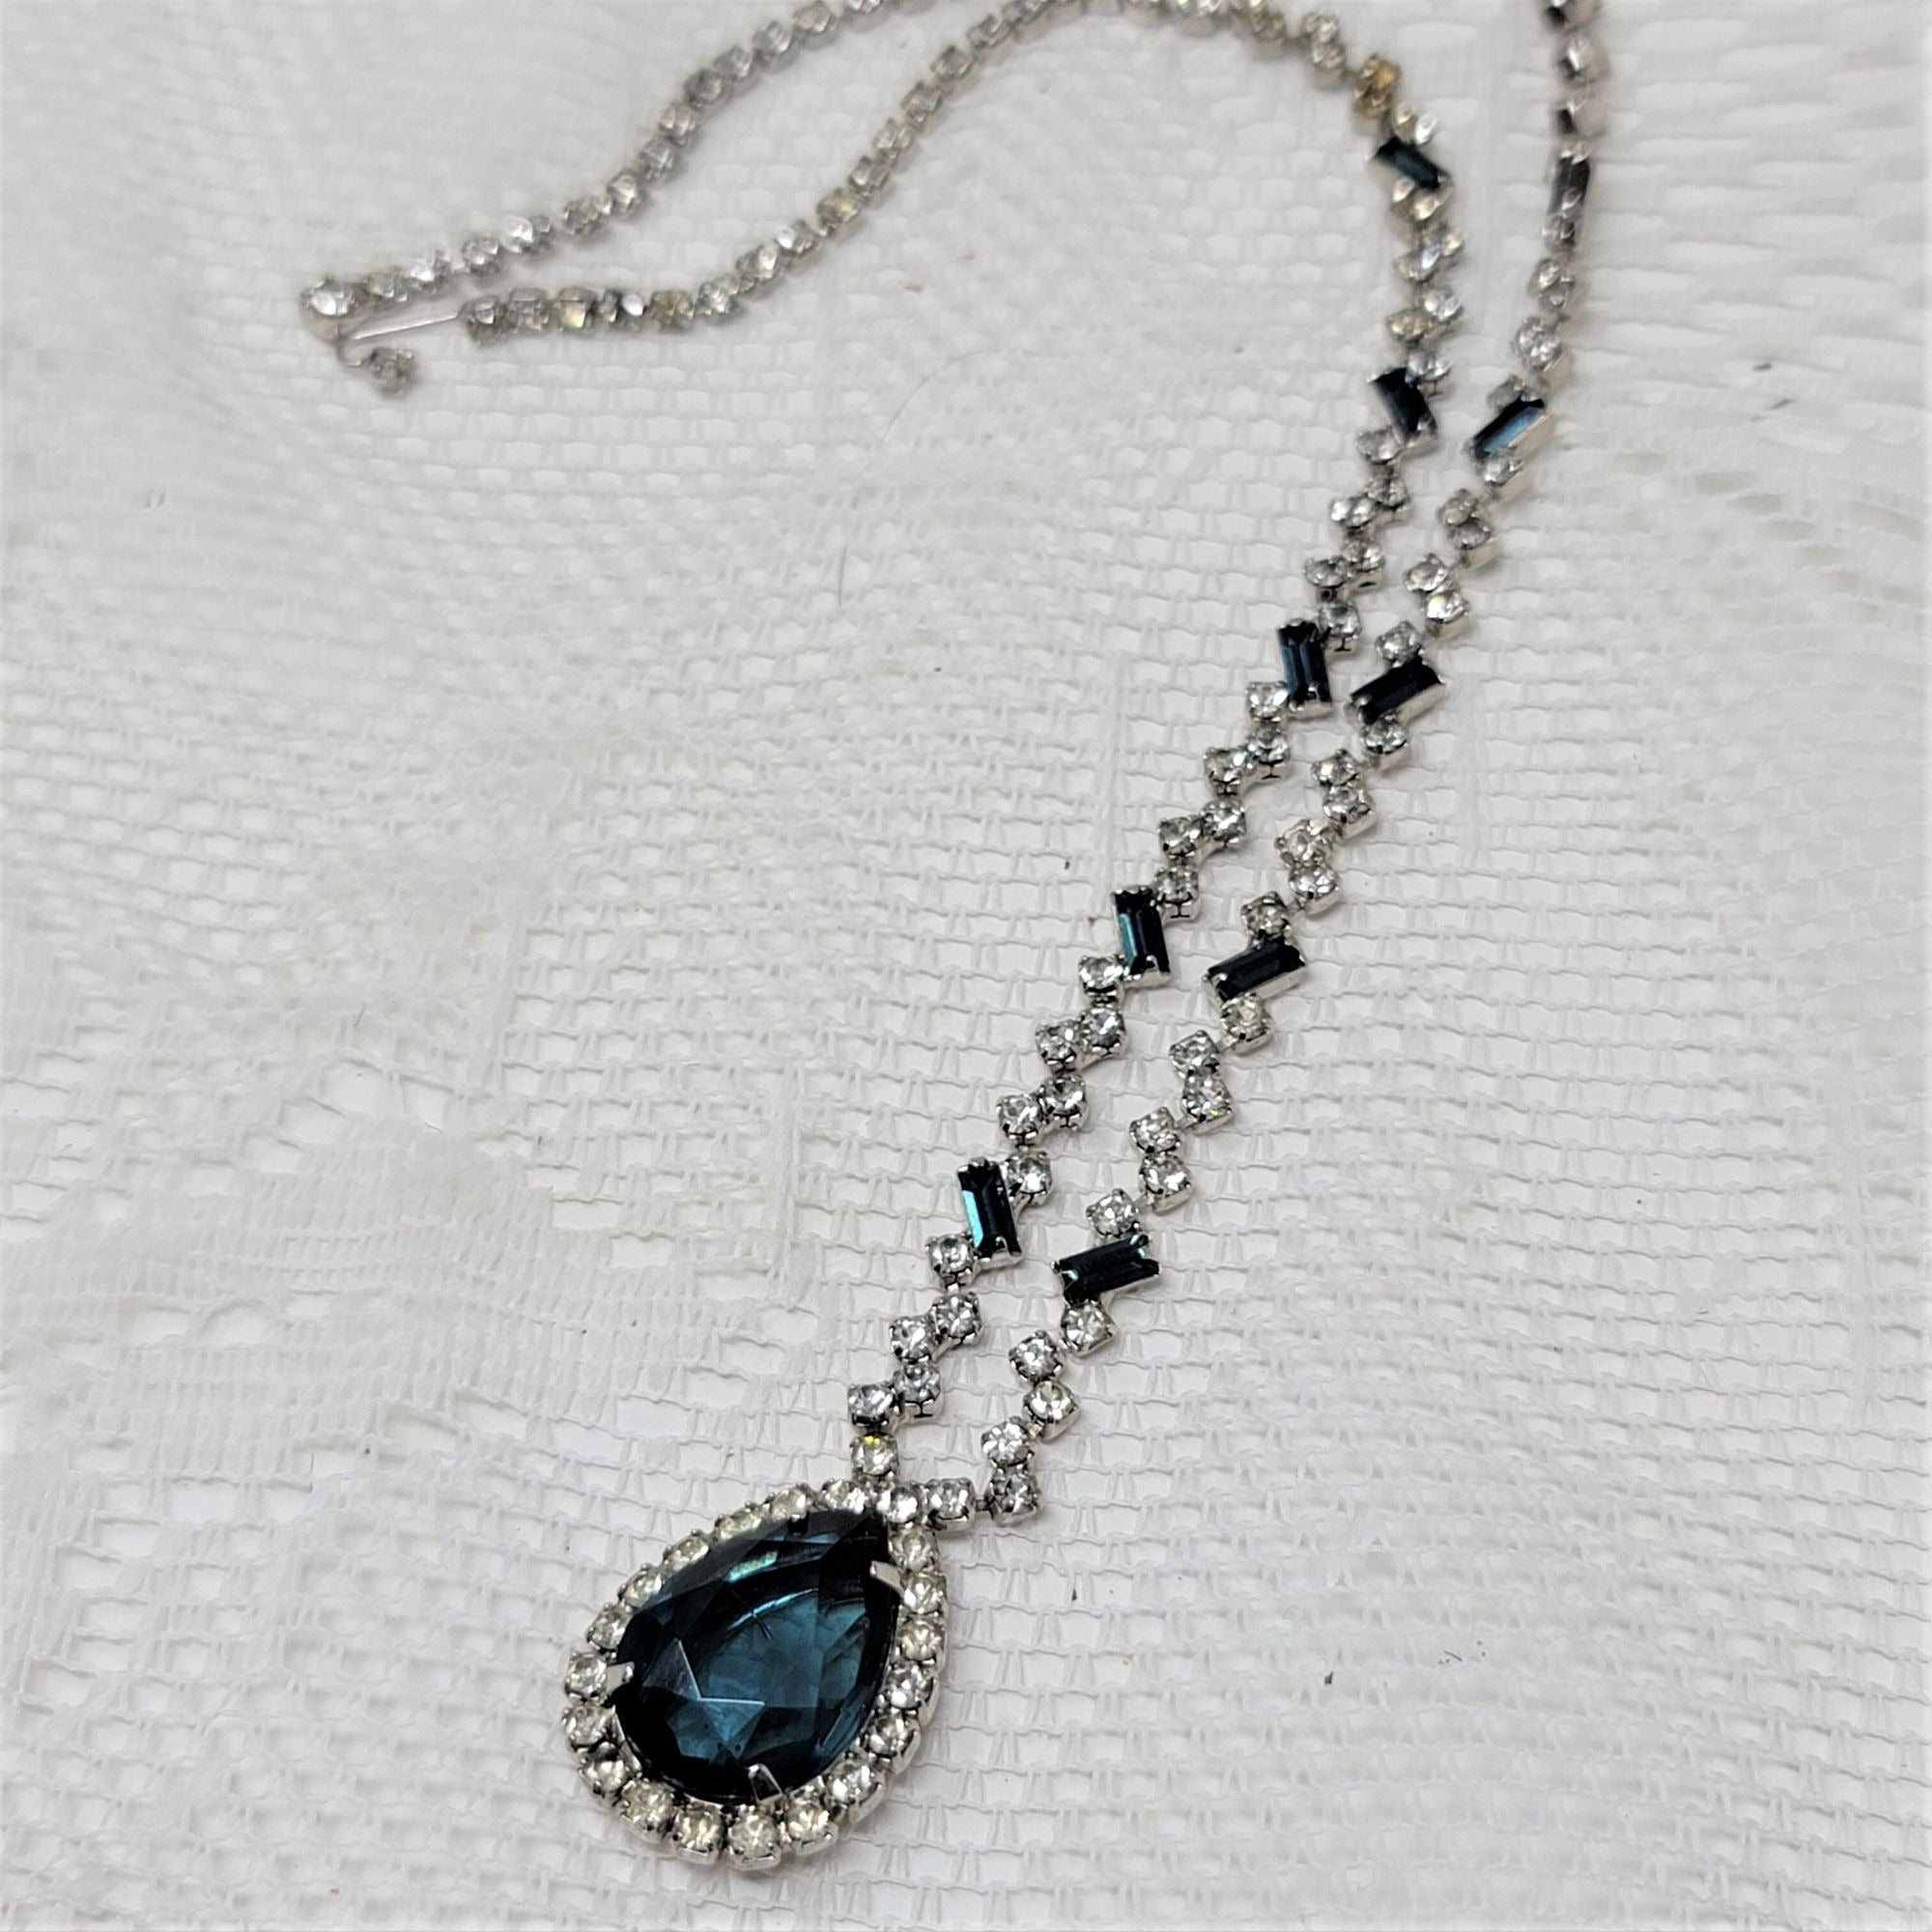 Sparkling Midnight Blue Glass and Rhinestone Necklace